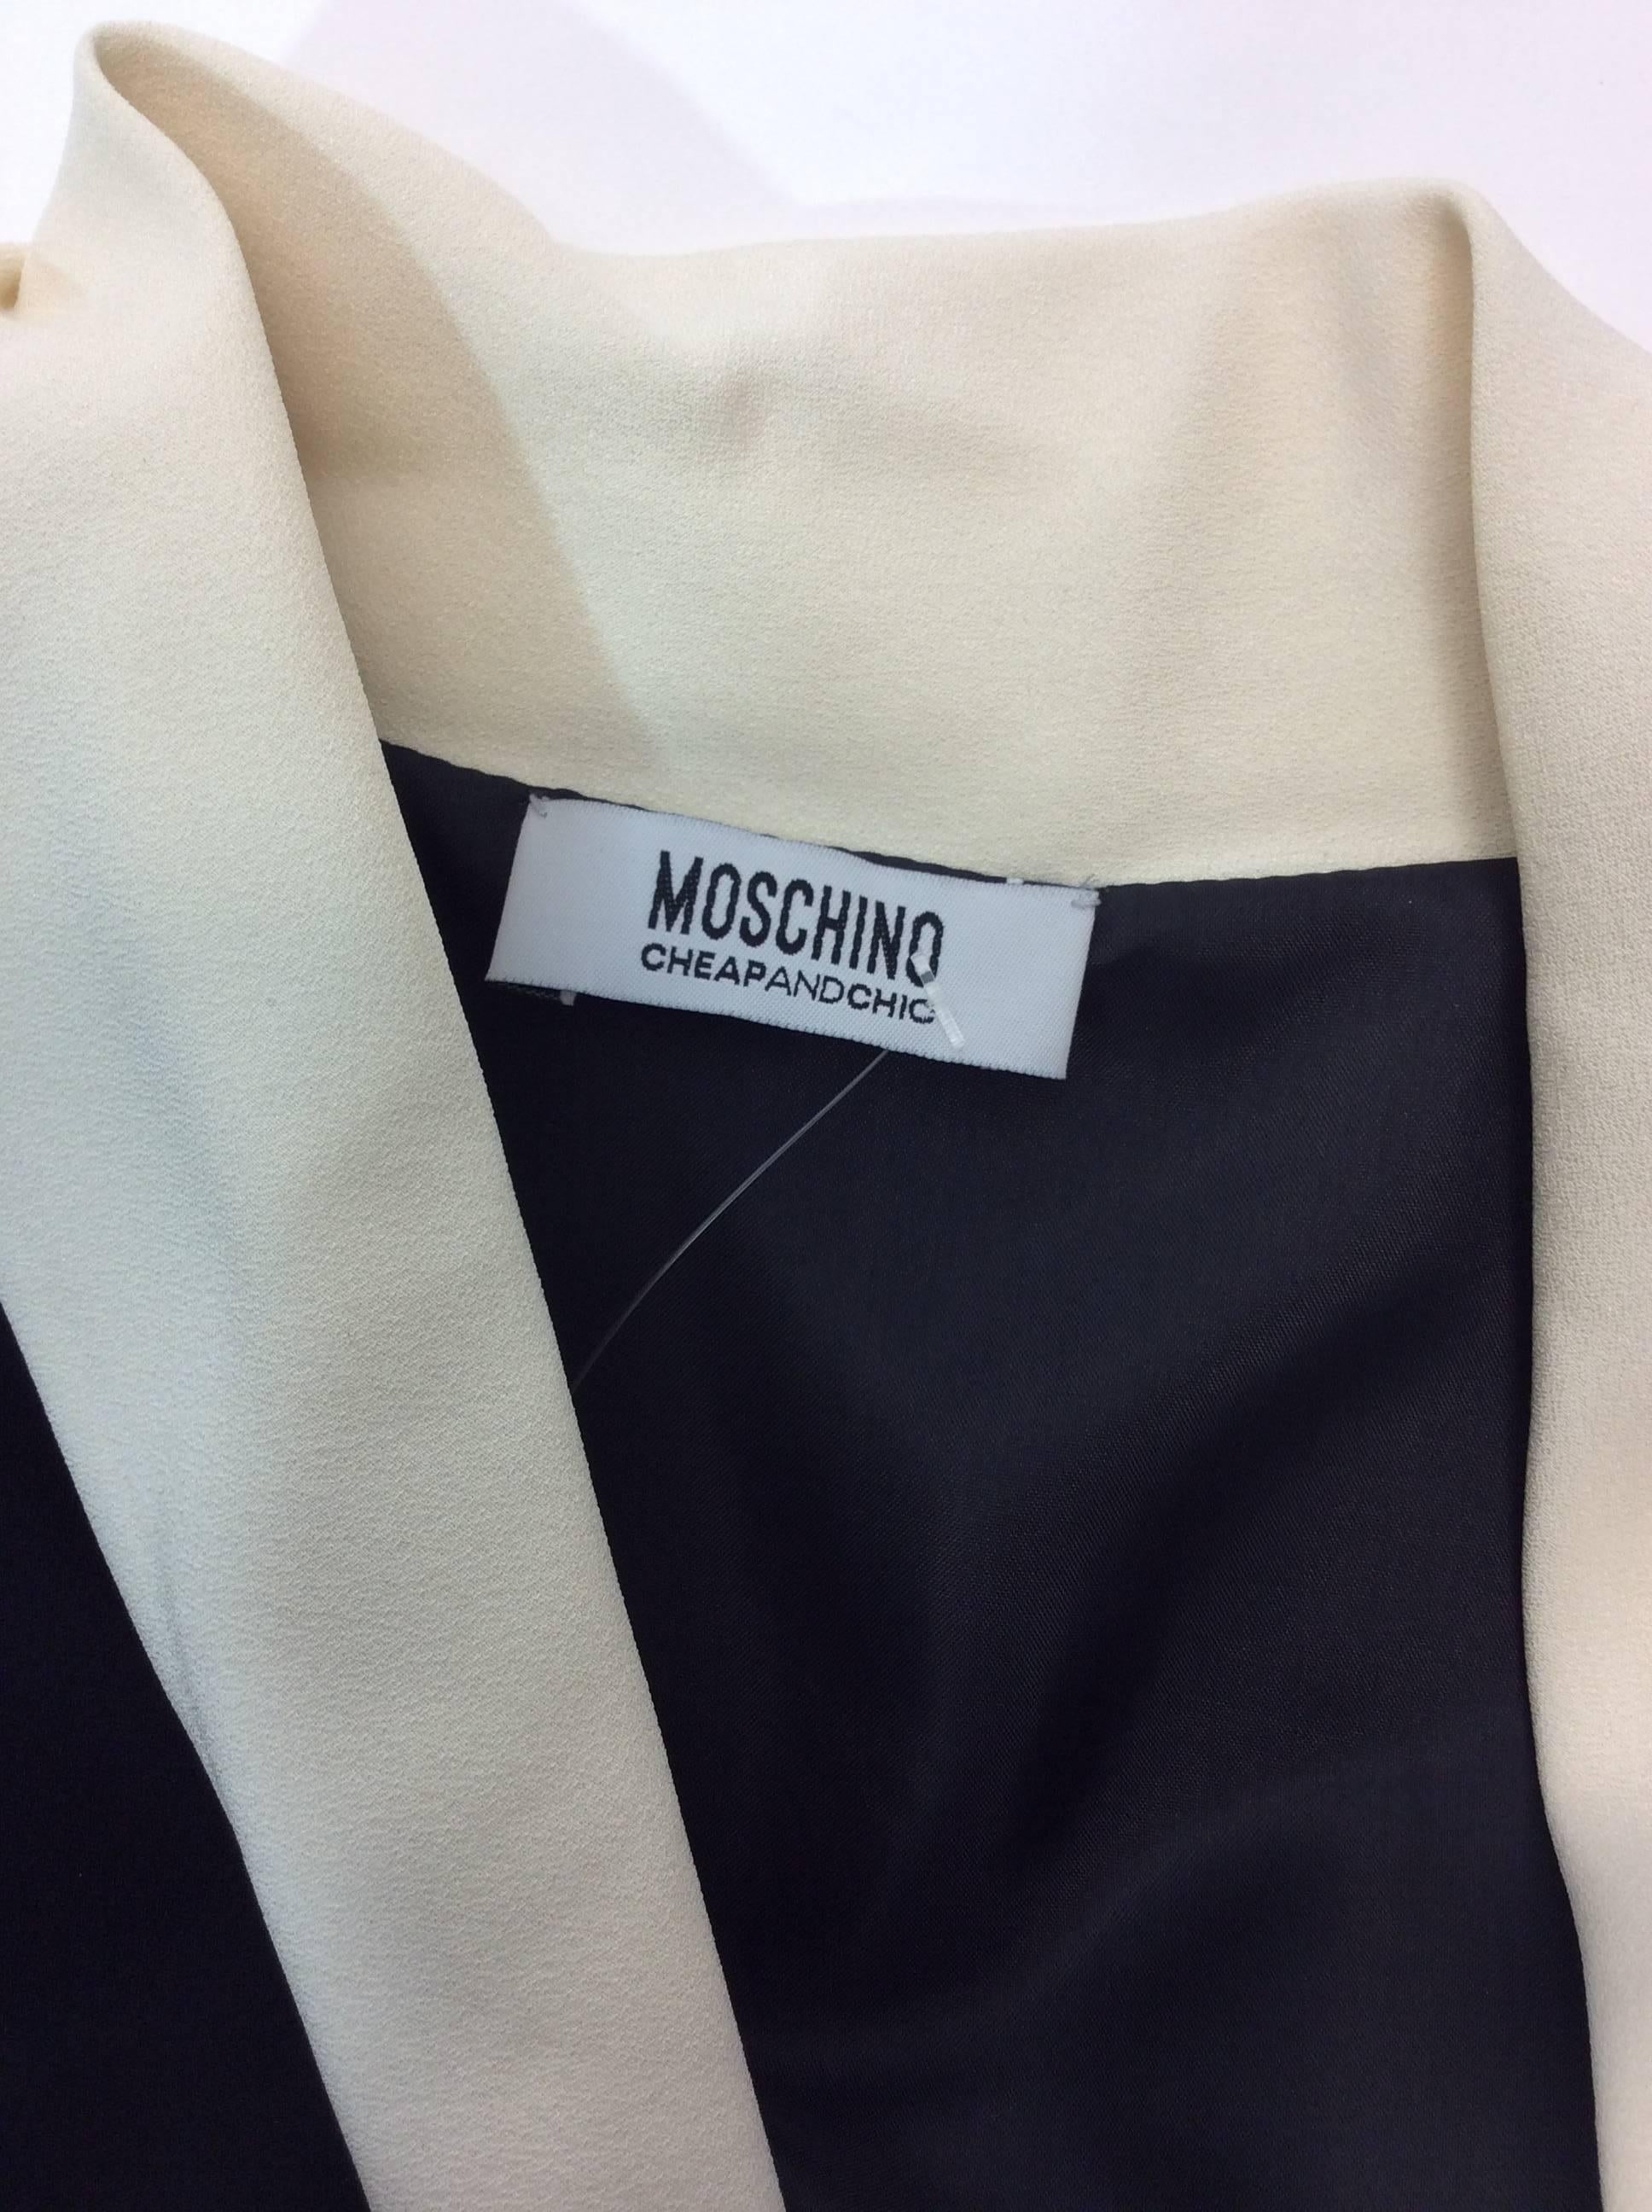 Moschino Black Sheath Dress with White Bow Detail For Sale 2